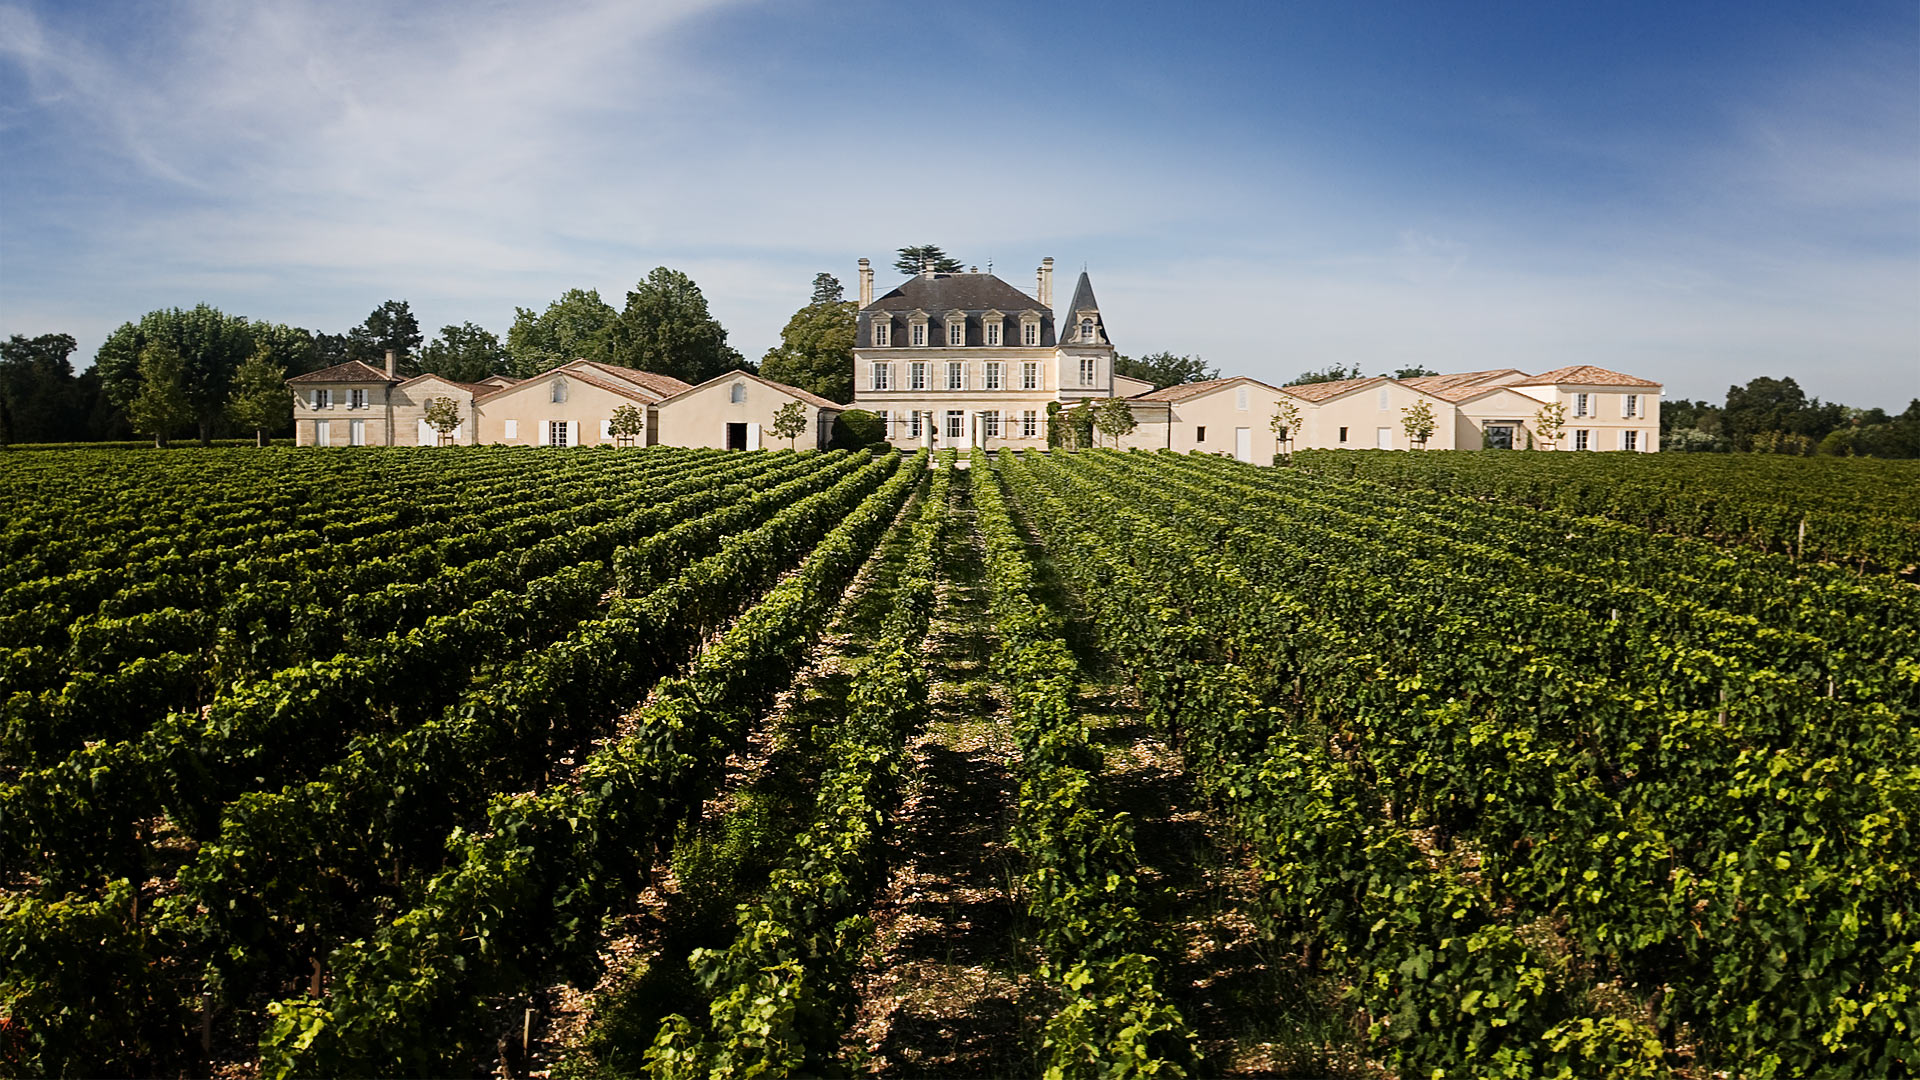 nuance Mælkehvid Følsom Learn about Chateau Grand Puy Lacoste Pauillac, Complete Guide